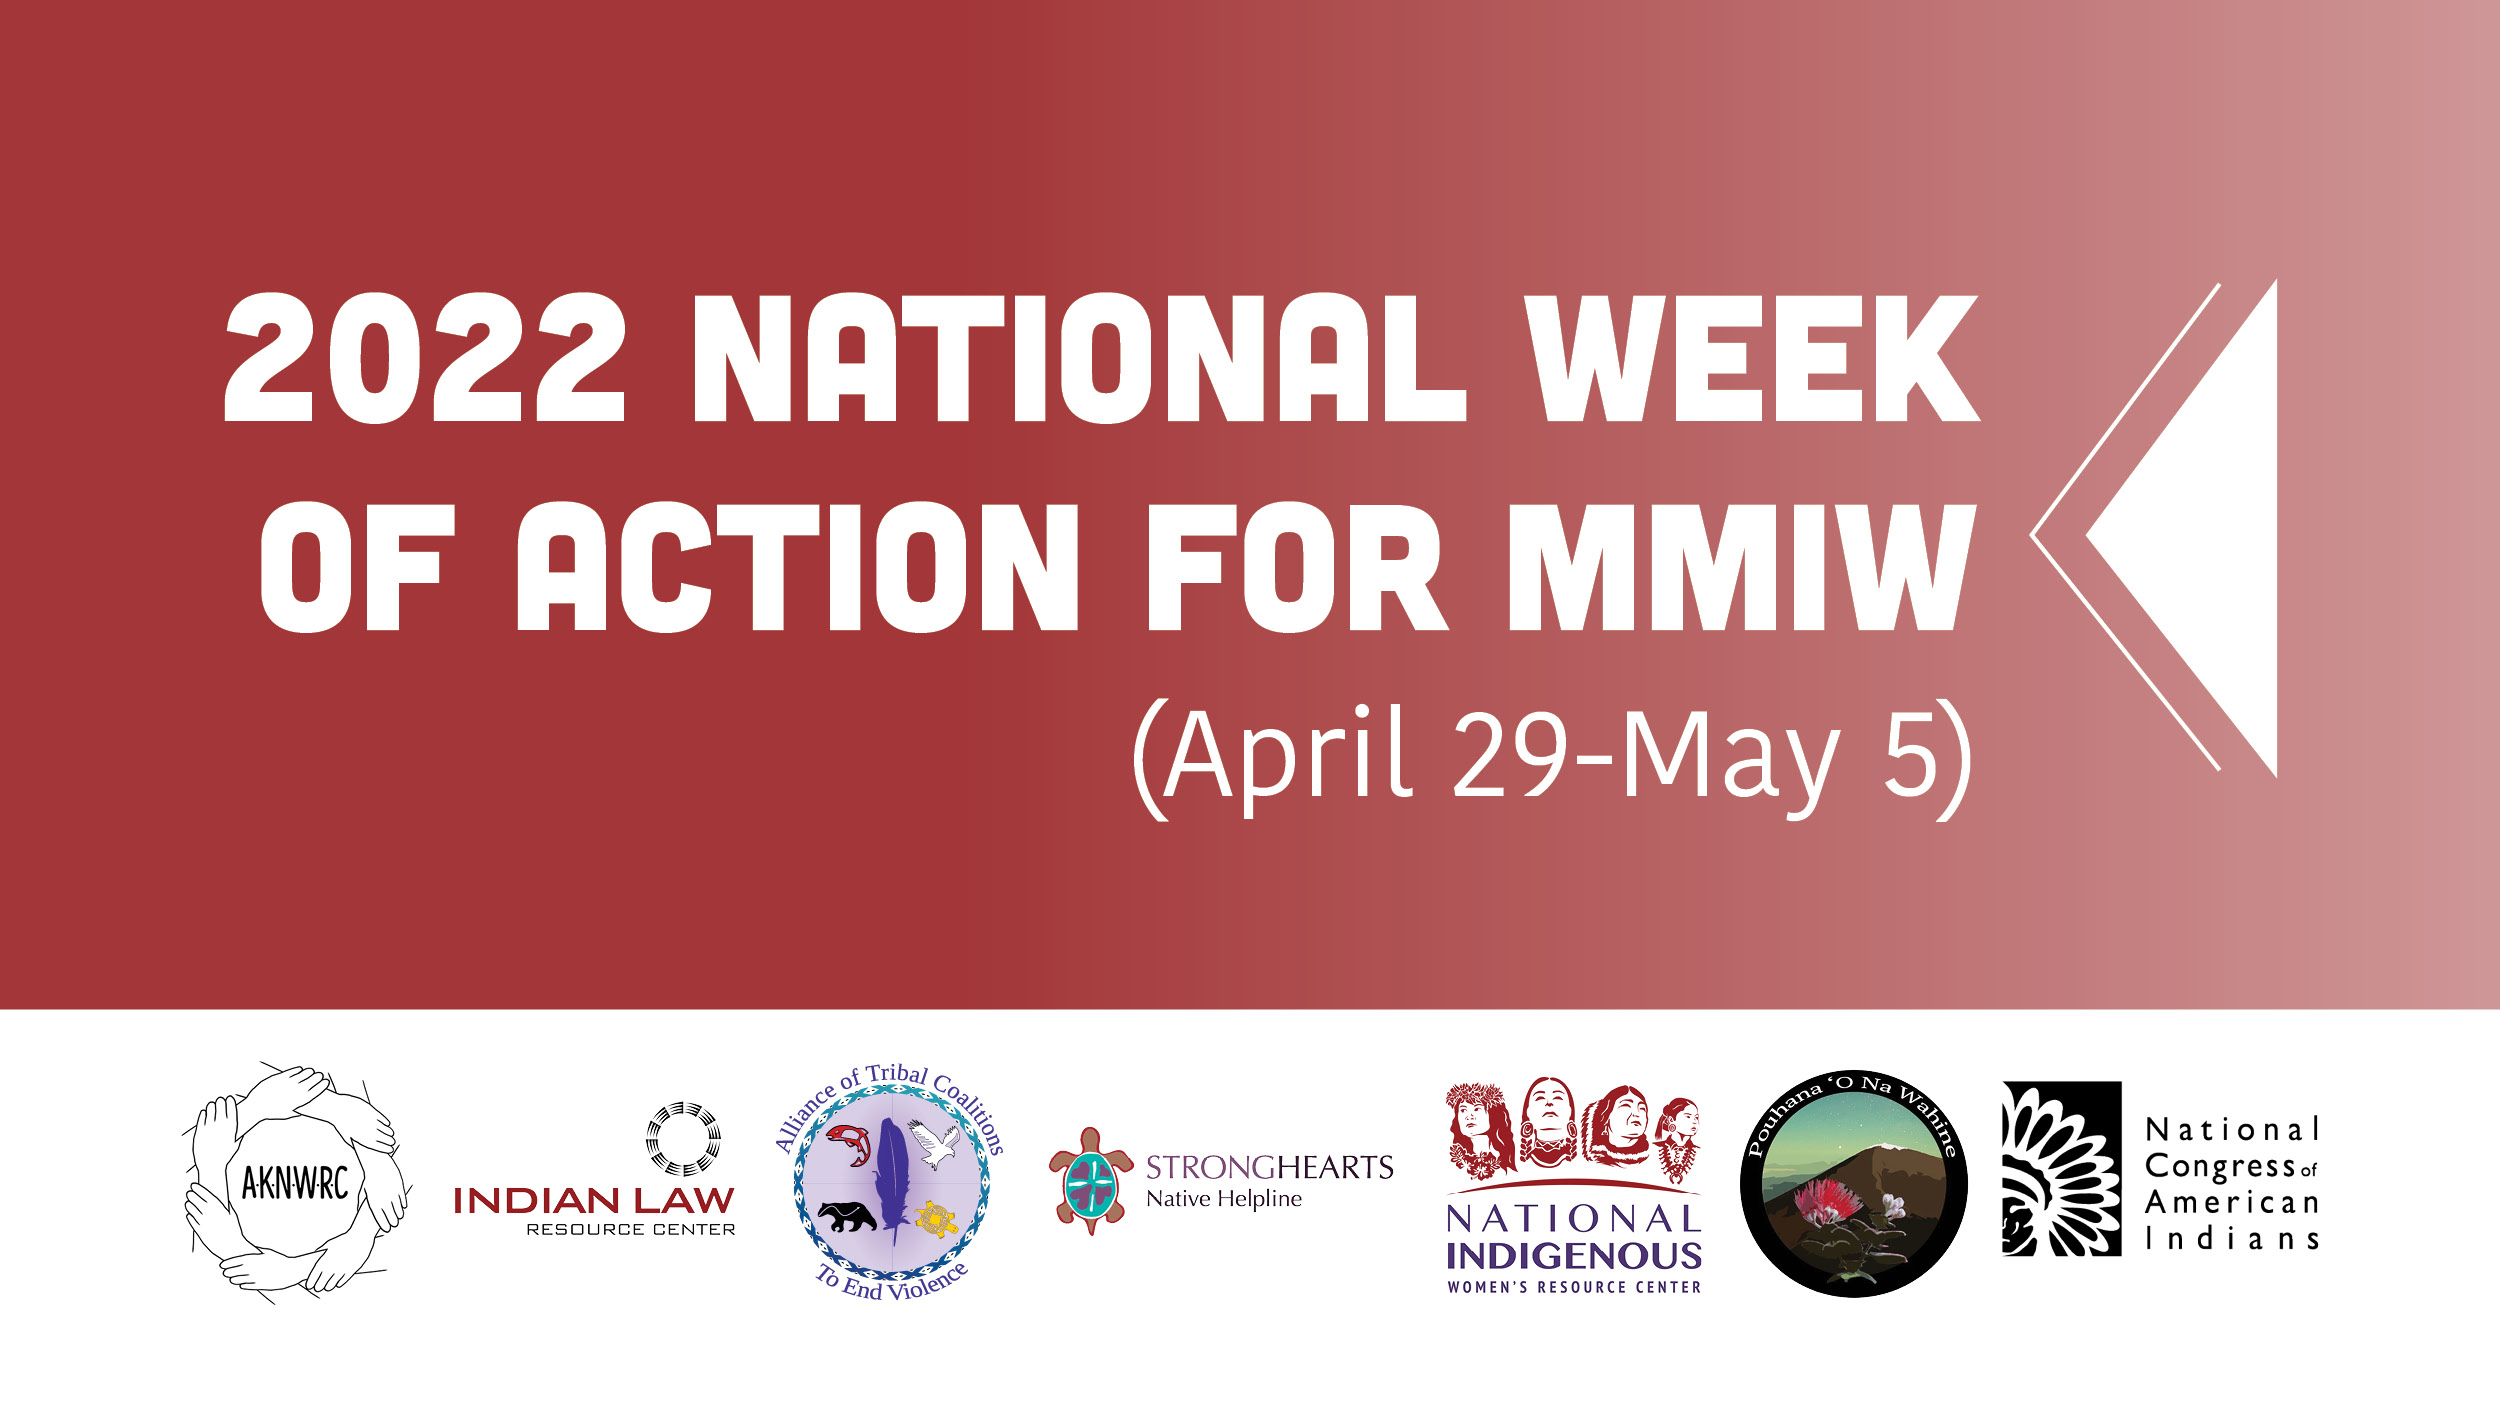 2022 National Week of Action for MMIW (April 29 - May 5) Logos: AKNWRC, Indian Law Resource Center, Alliance of Tribal Coalitions to End Violence, Stronghearts Native Helpline, NIWRC, Pouhana 'O Na Wahime, and the National Congress of American Indians.